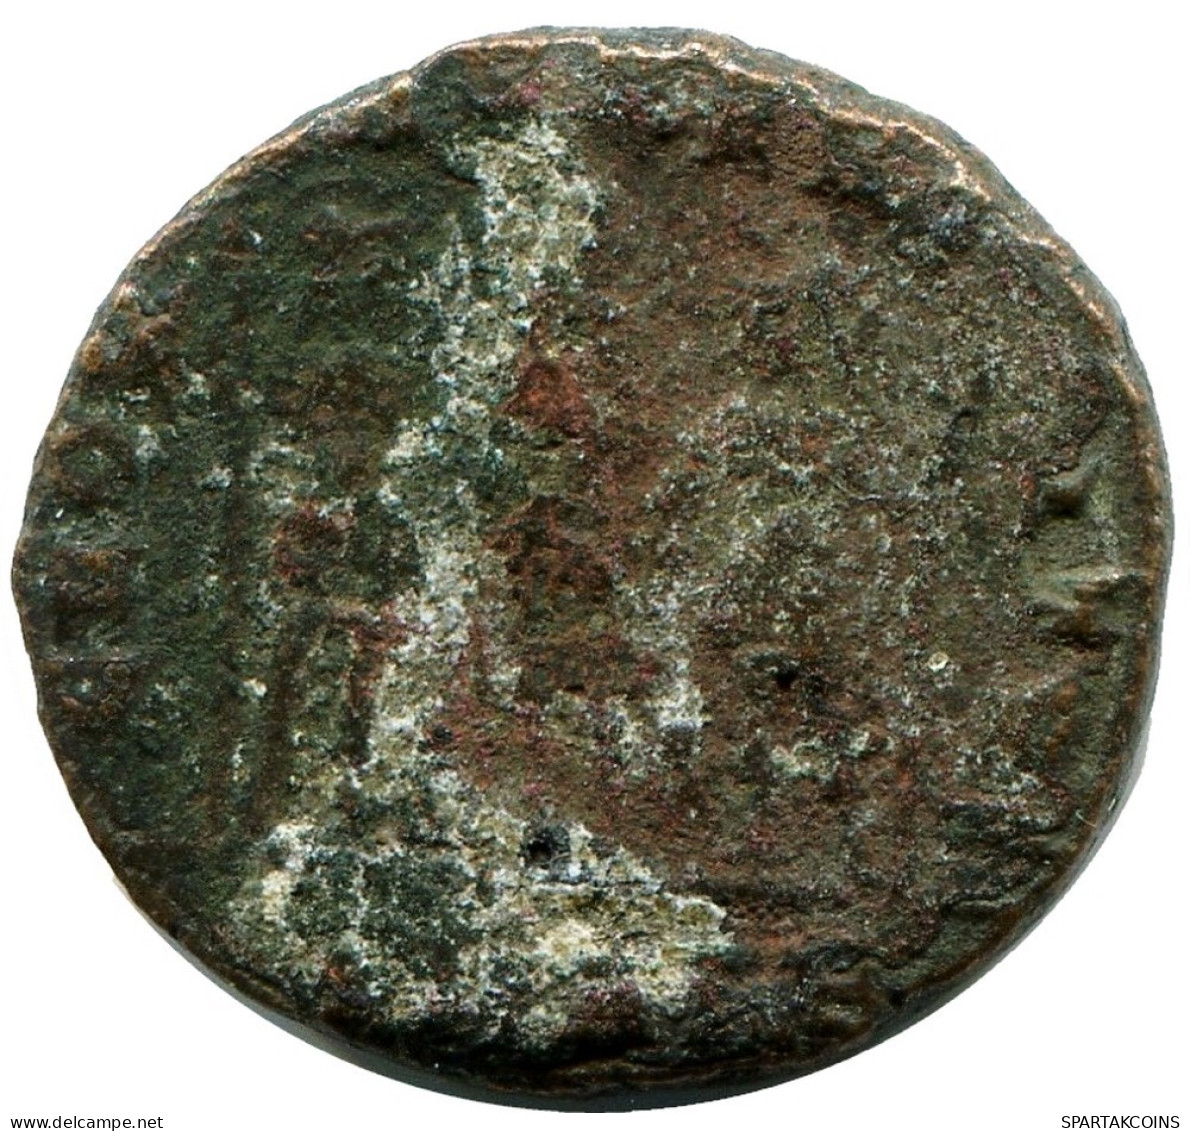 CONSTANS MINTED IN ALEKSANDRIA FROM THE ROYAL ONTARIO MUSEUM #ANC11419.14.F.A - El Imperio Christiano (307 / 363)